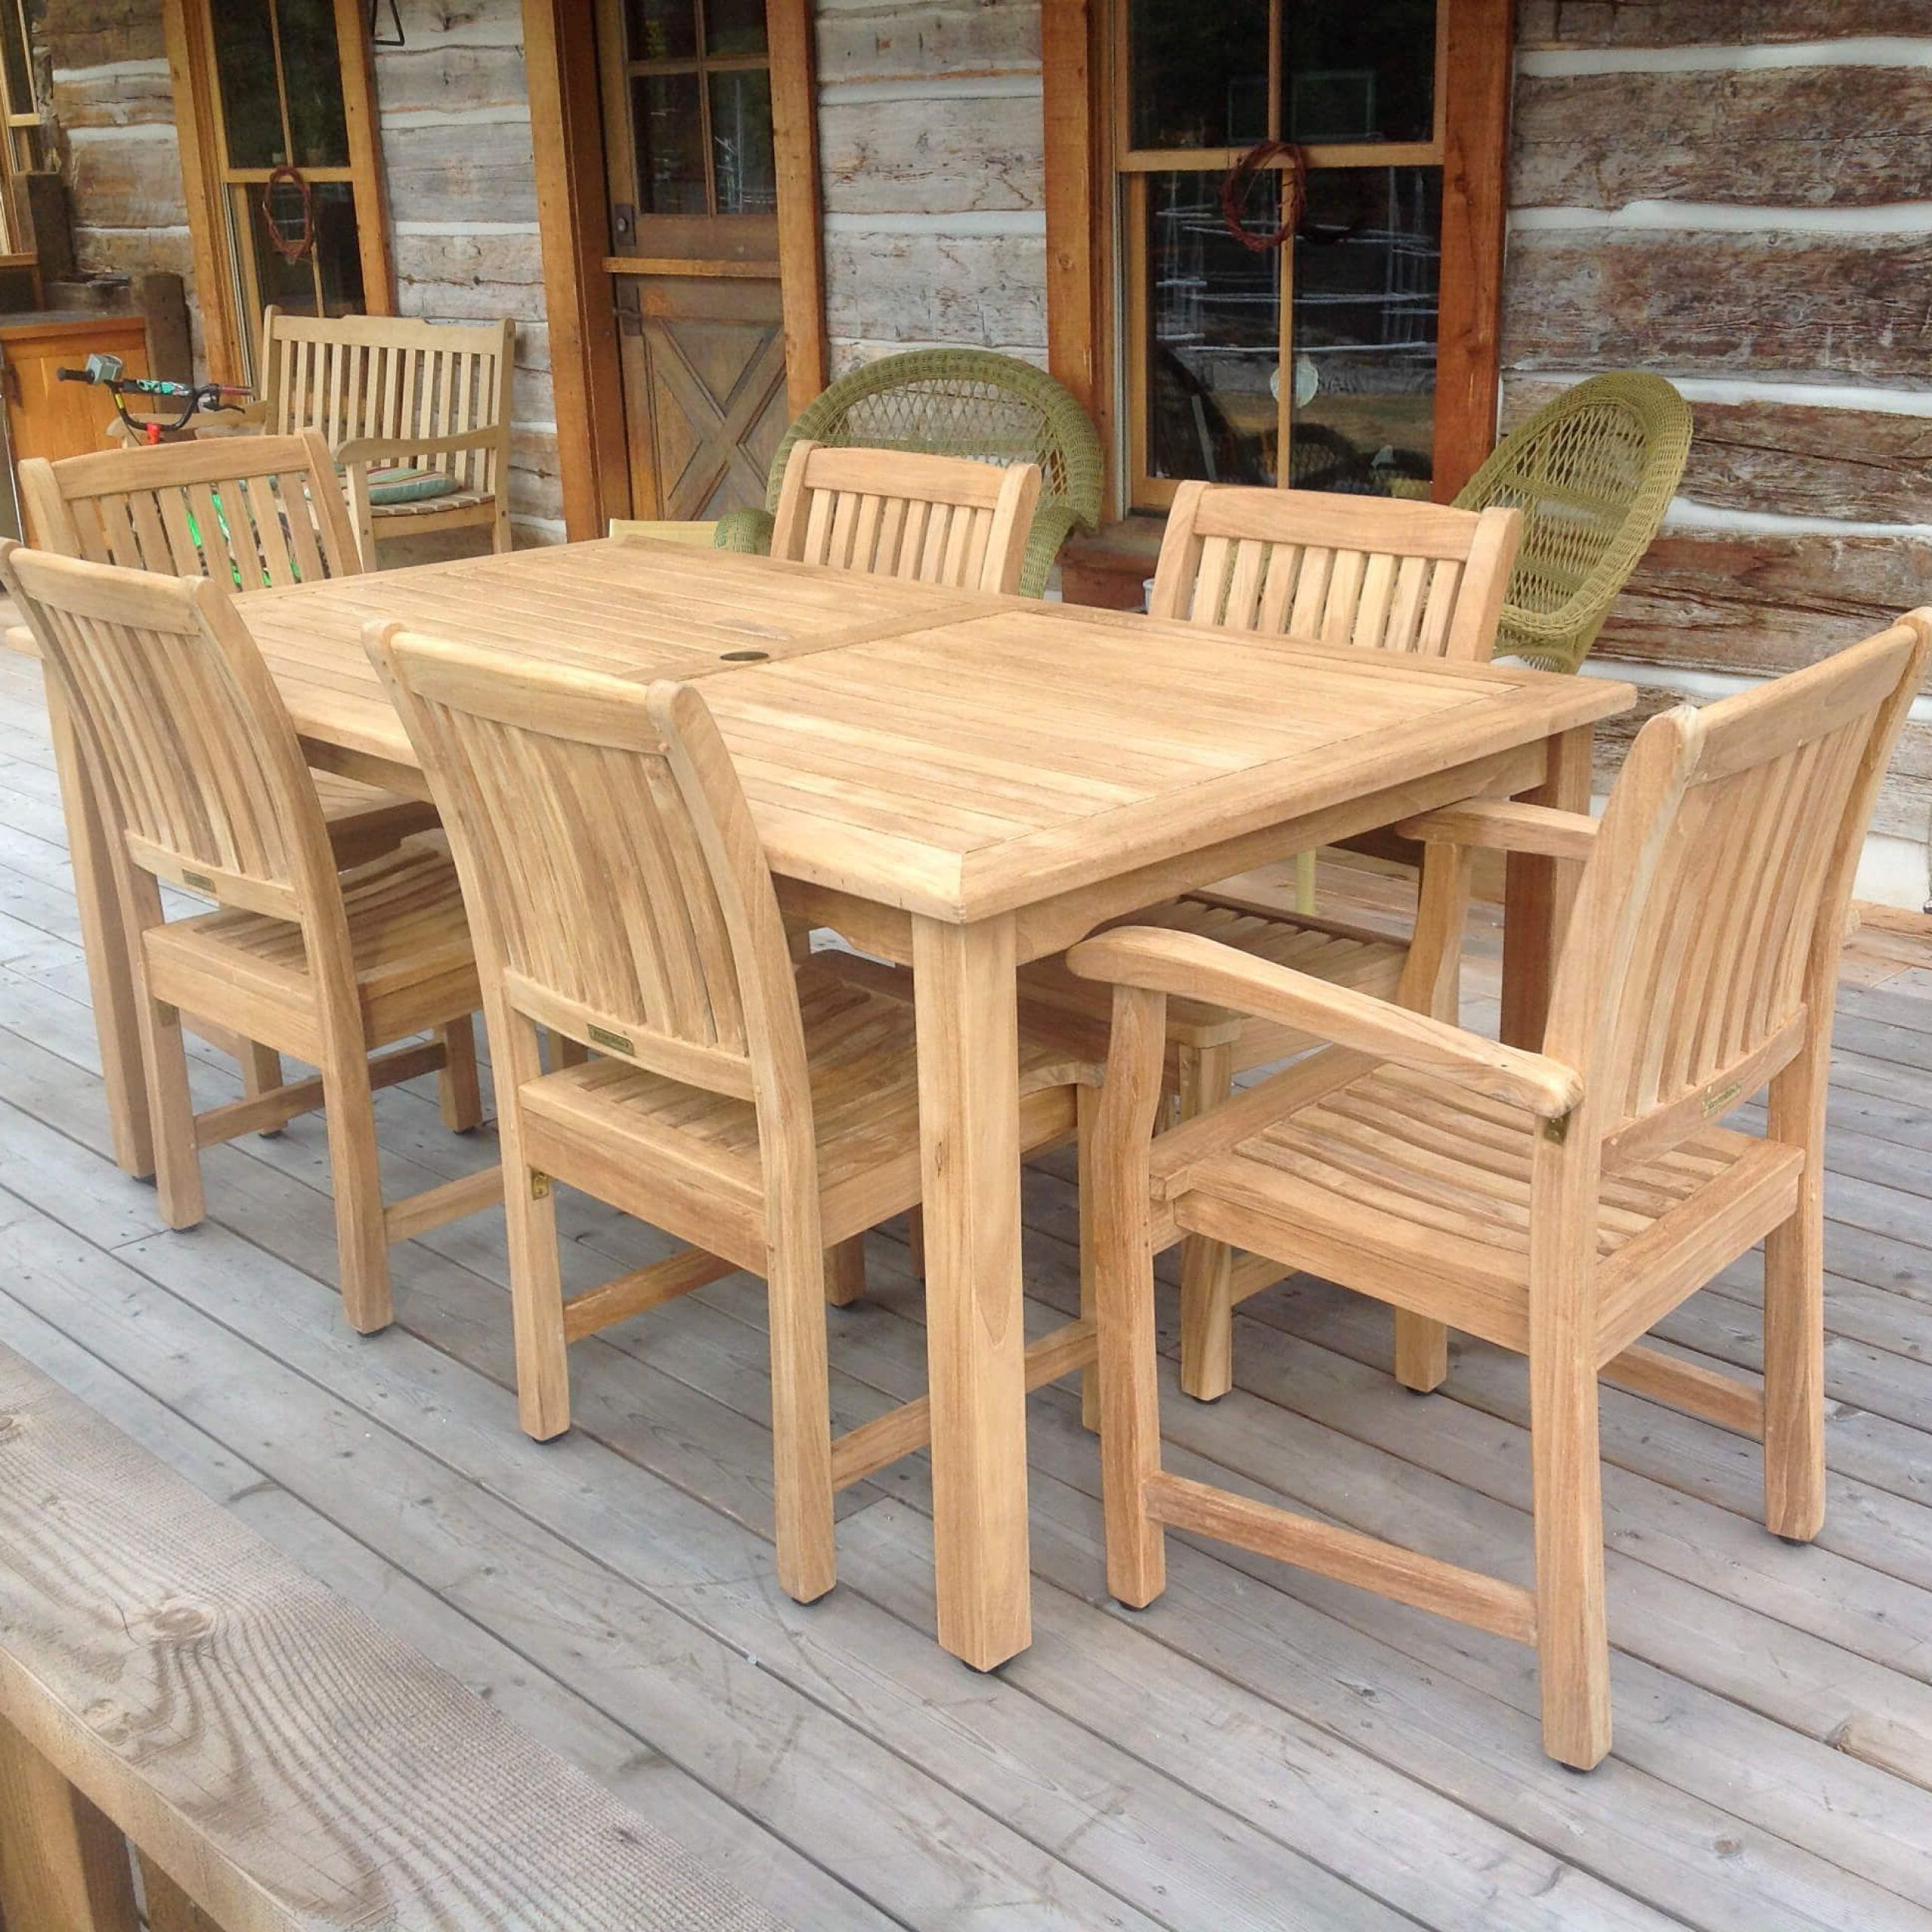 Favorite Teak Outdoor Square Dining Sets With Regard To Teak Patio Dining Set For 6 Rectangular Table And 6 Teak Chairs (View 2 of 15)